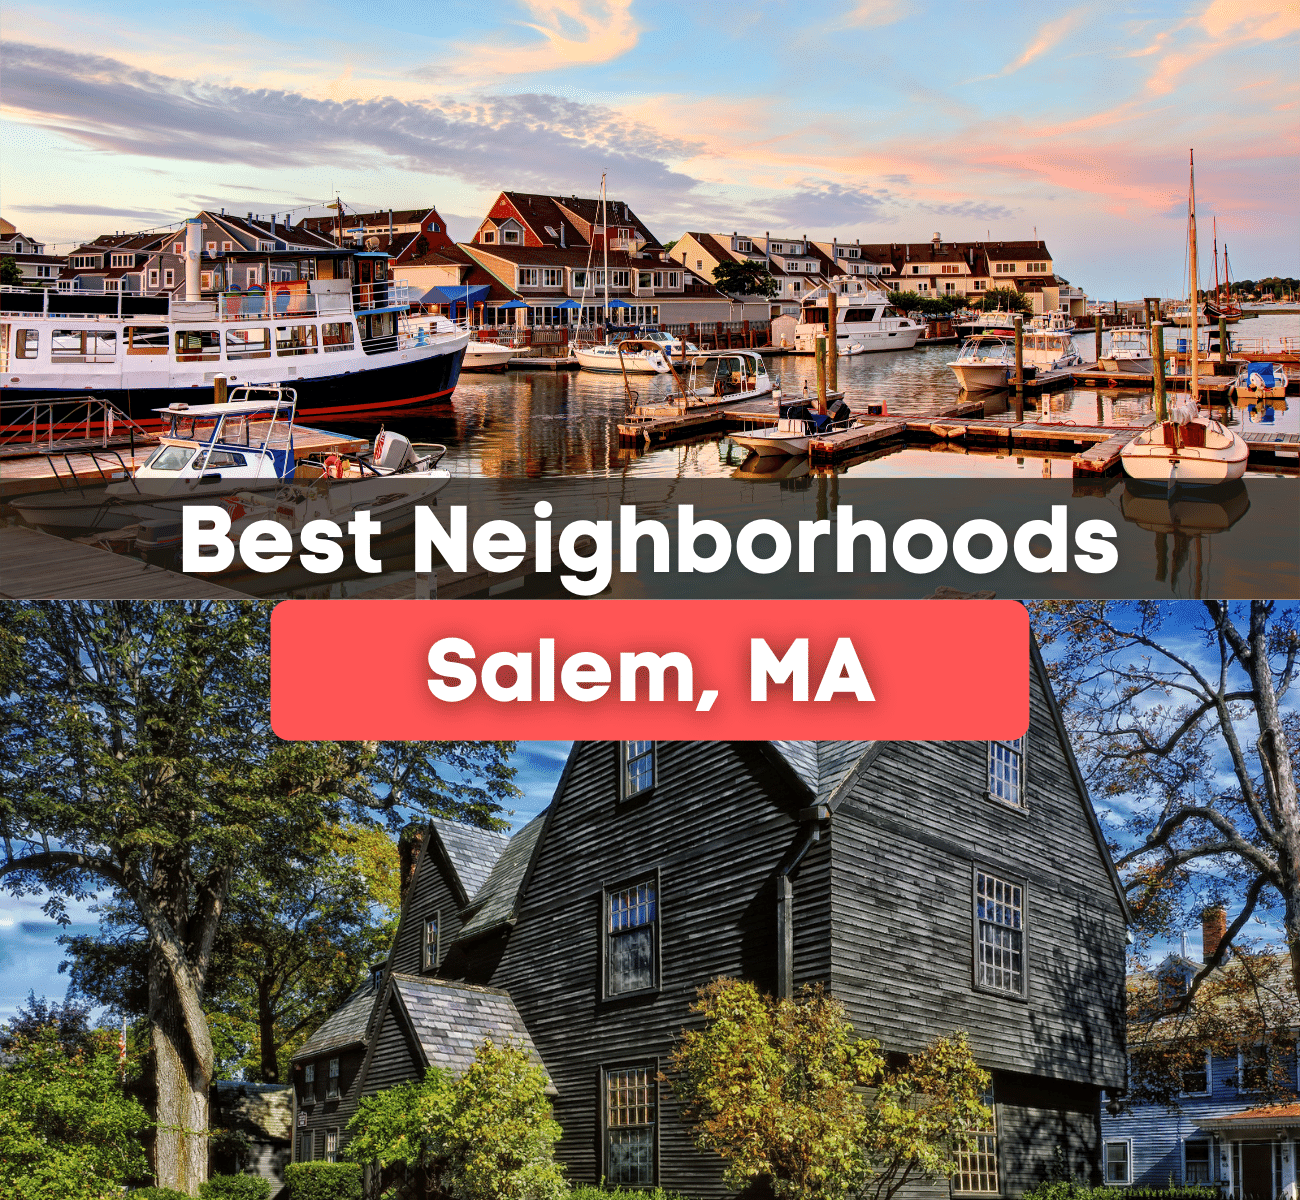 best neighborhoods in Salem, MA graphic - waterfront view in Salem with boats and the House of the Seven Gables